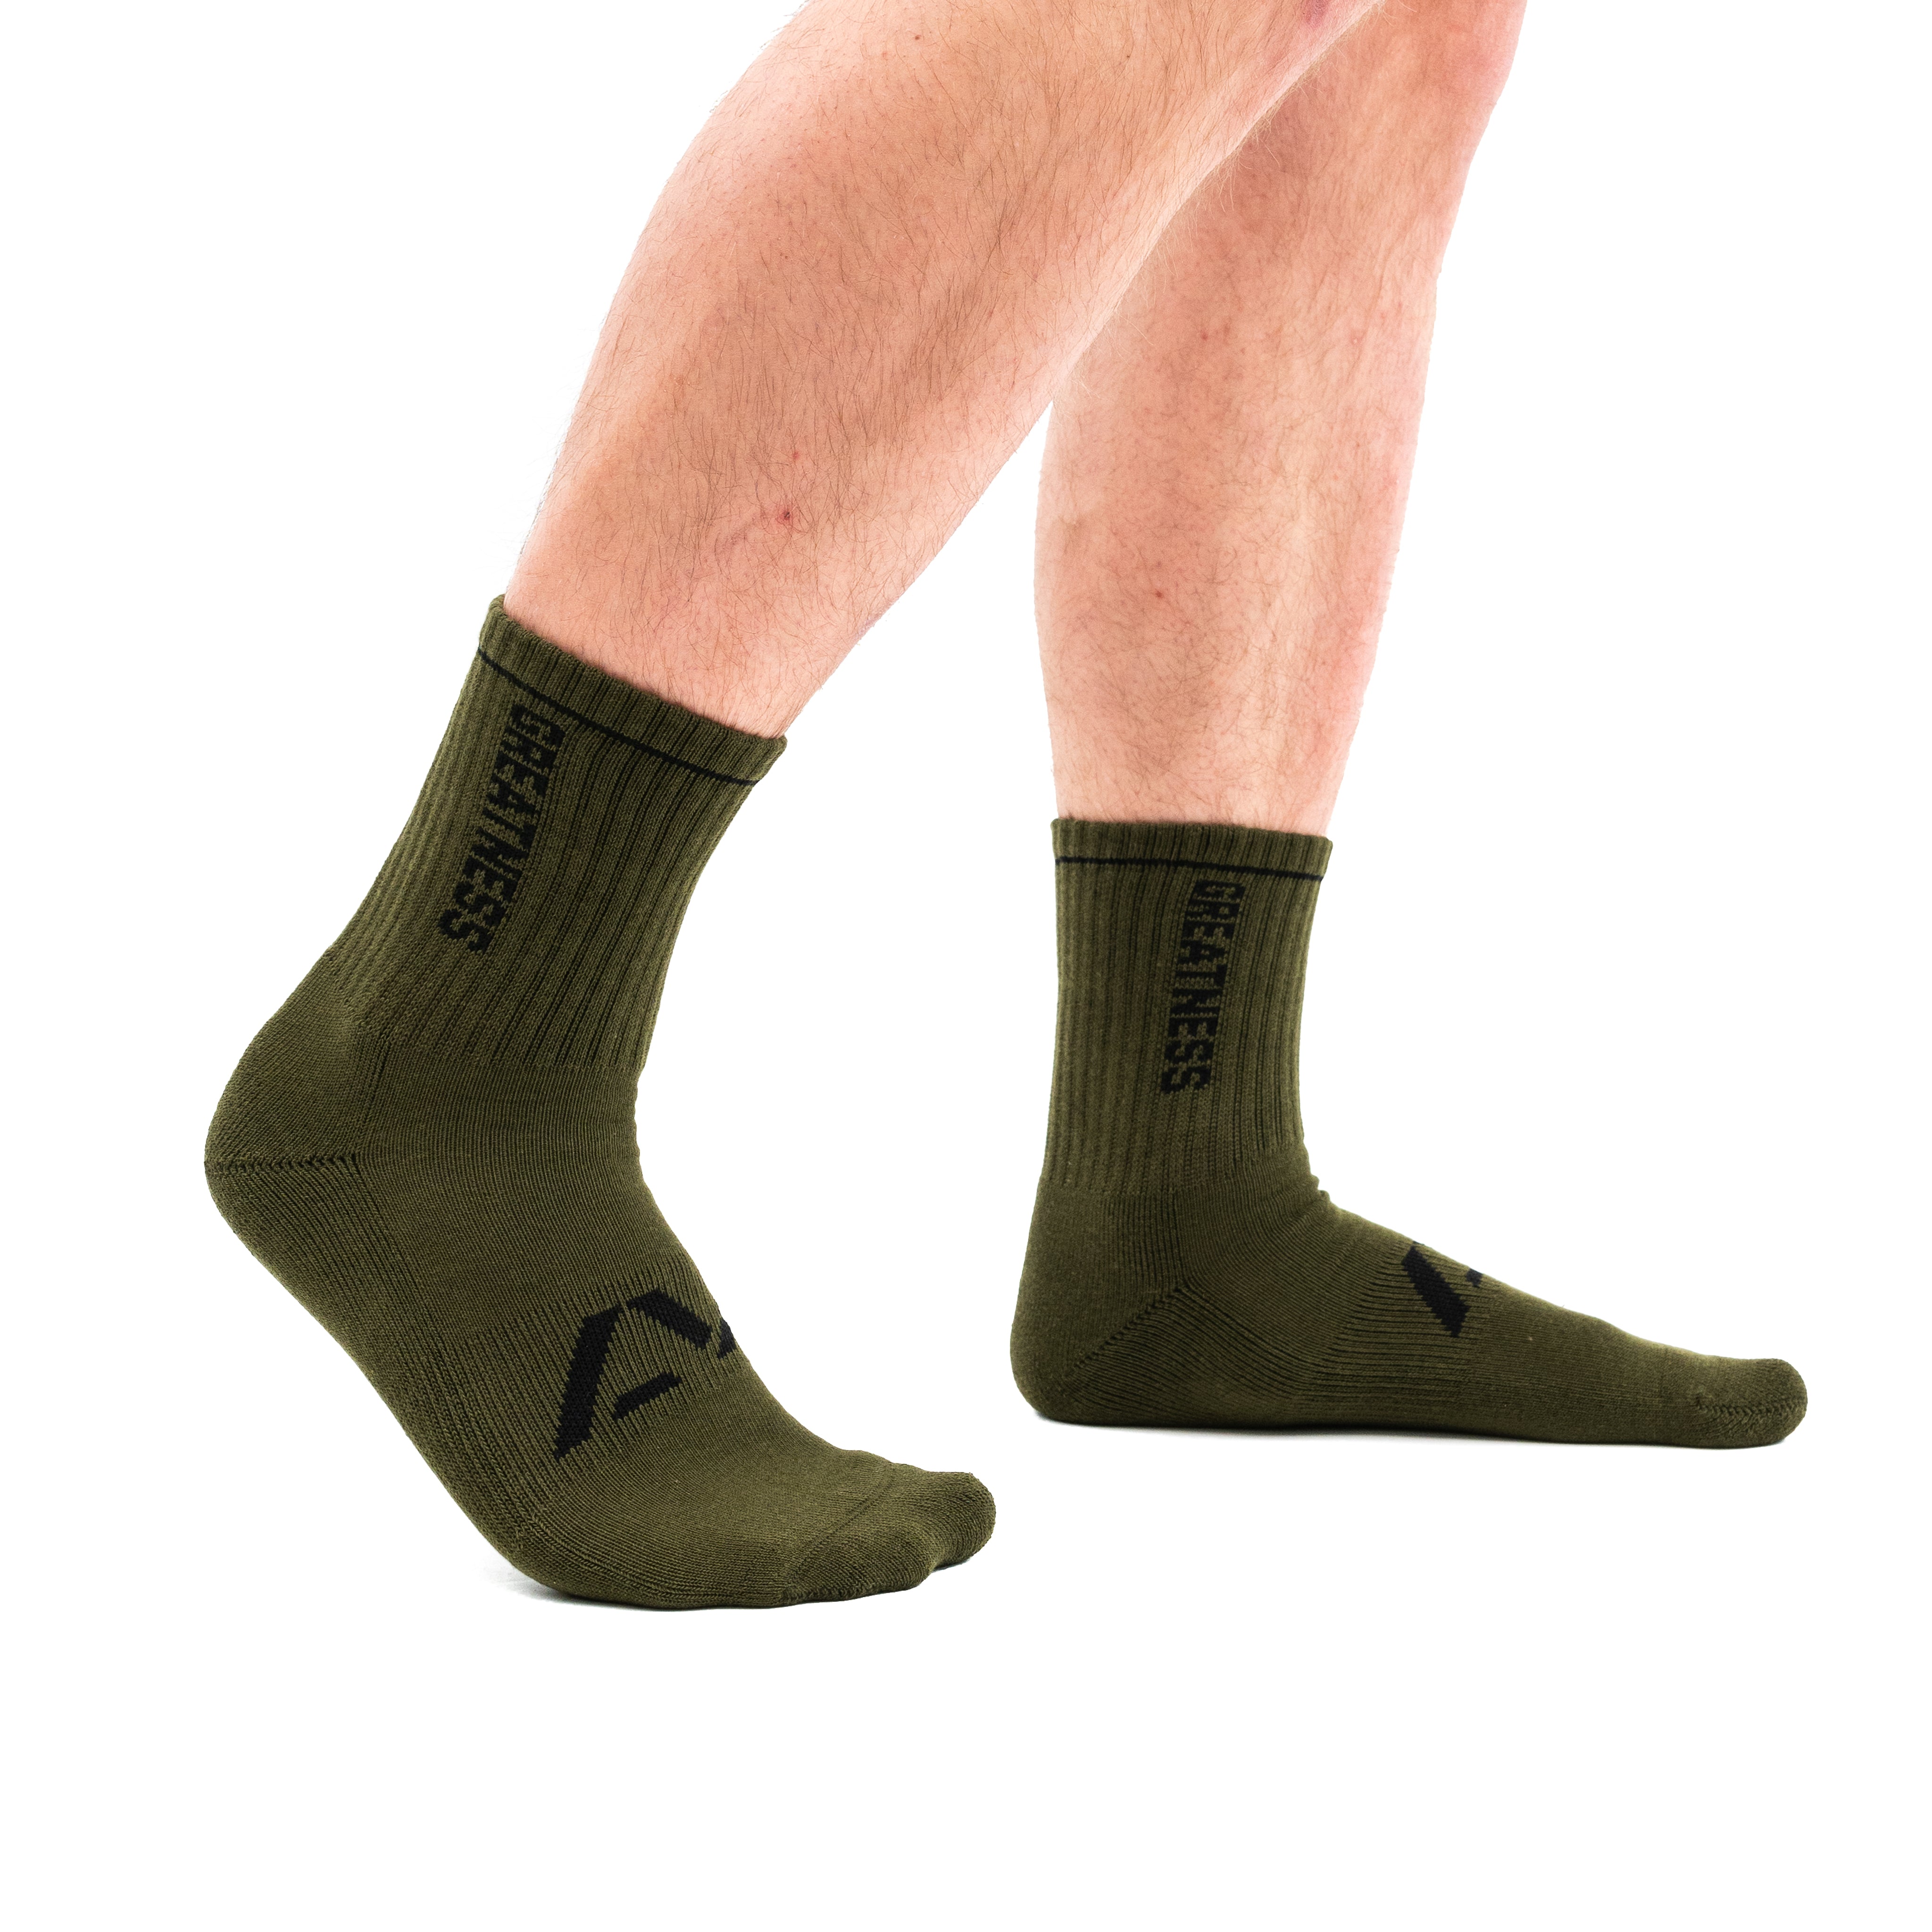 Your feet are important and durable crew socks are just as importing when out and about or in the gym. These military crew socks have a cushioned footbed, arch support and light compression of the ankle. A7 Crew socks are IPF Approved so a great addition to your IPF Approved Kit. A7 Crew socks shipping to Europe and the UK, Norway, Switzerland and Iceland.